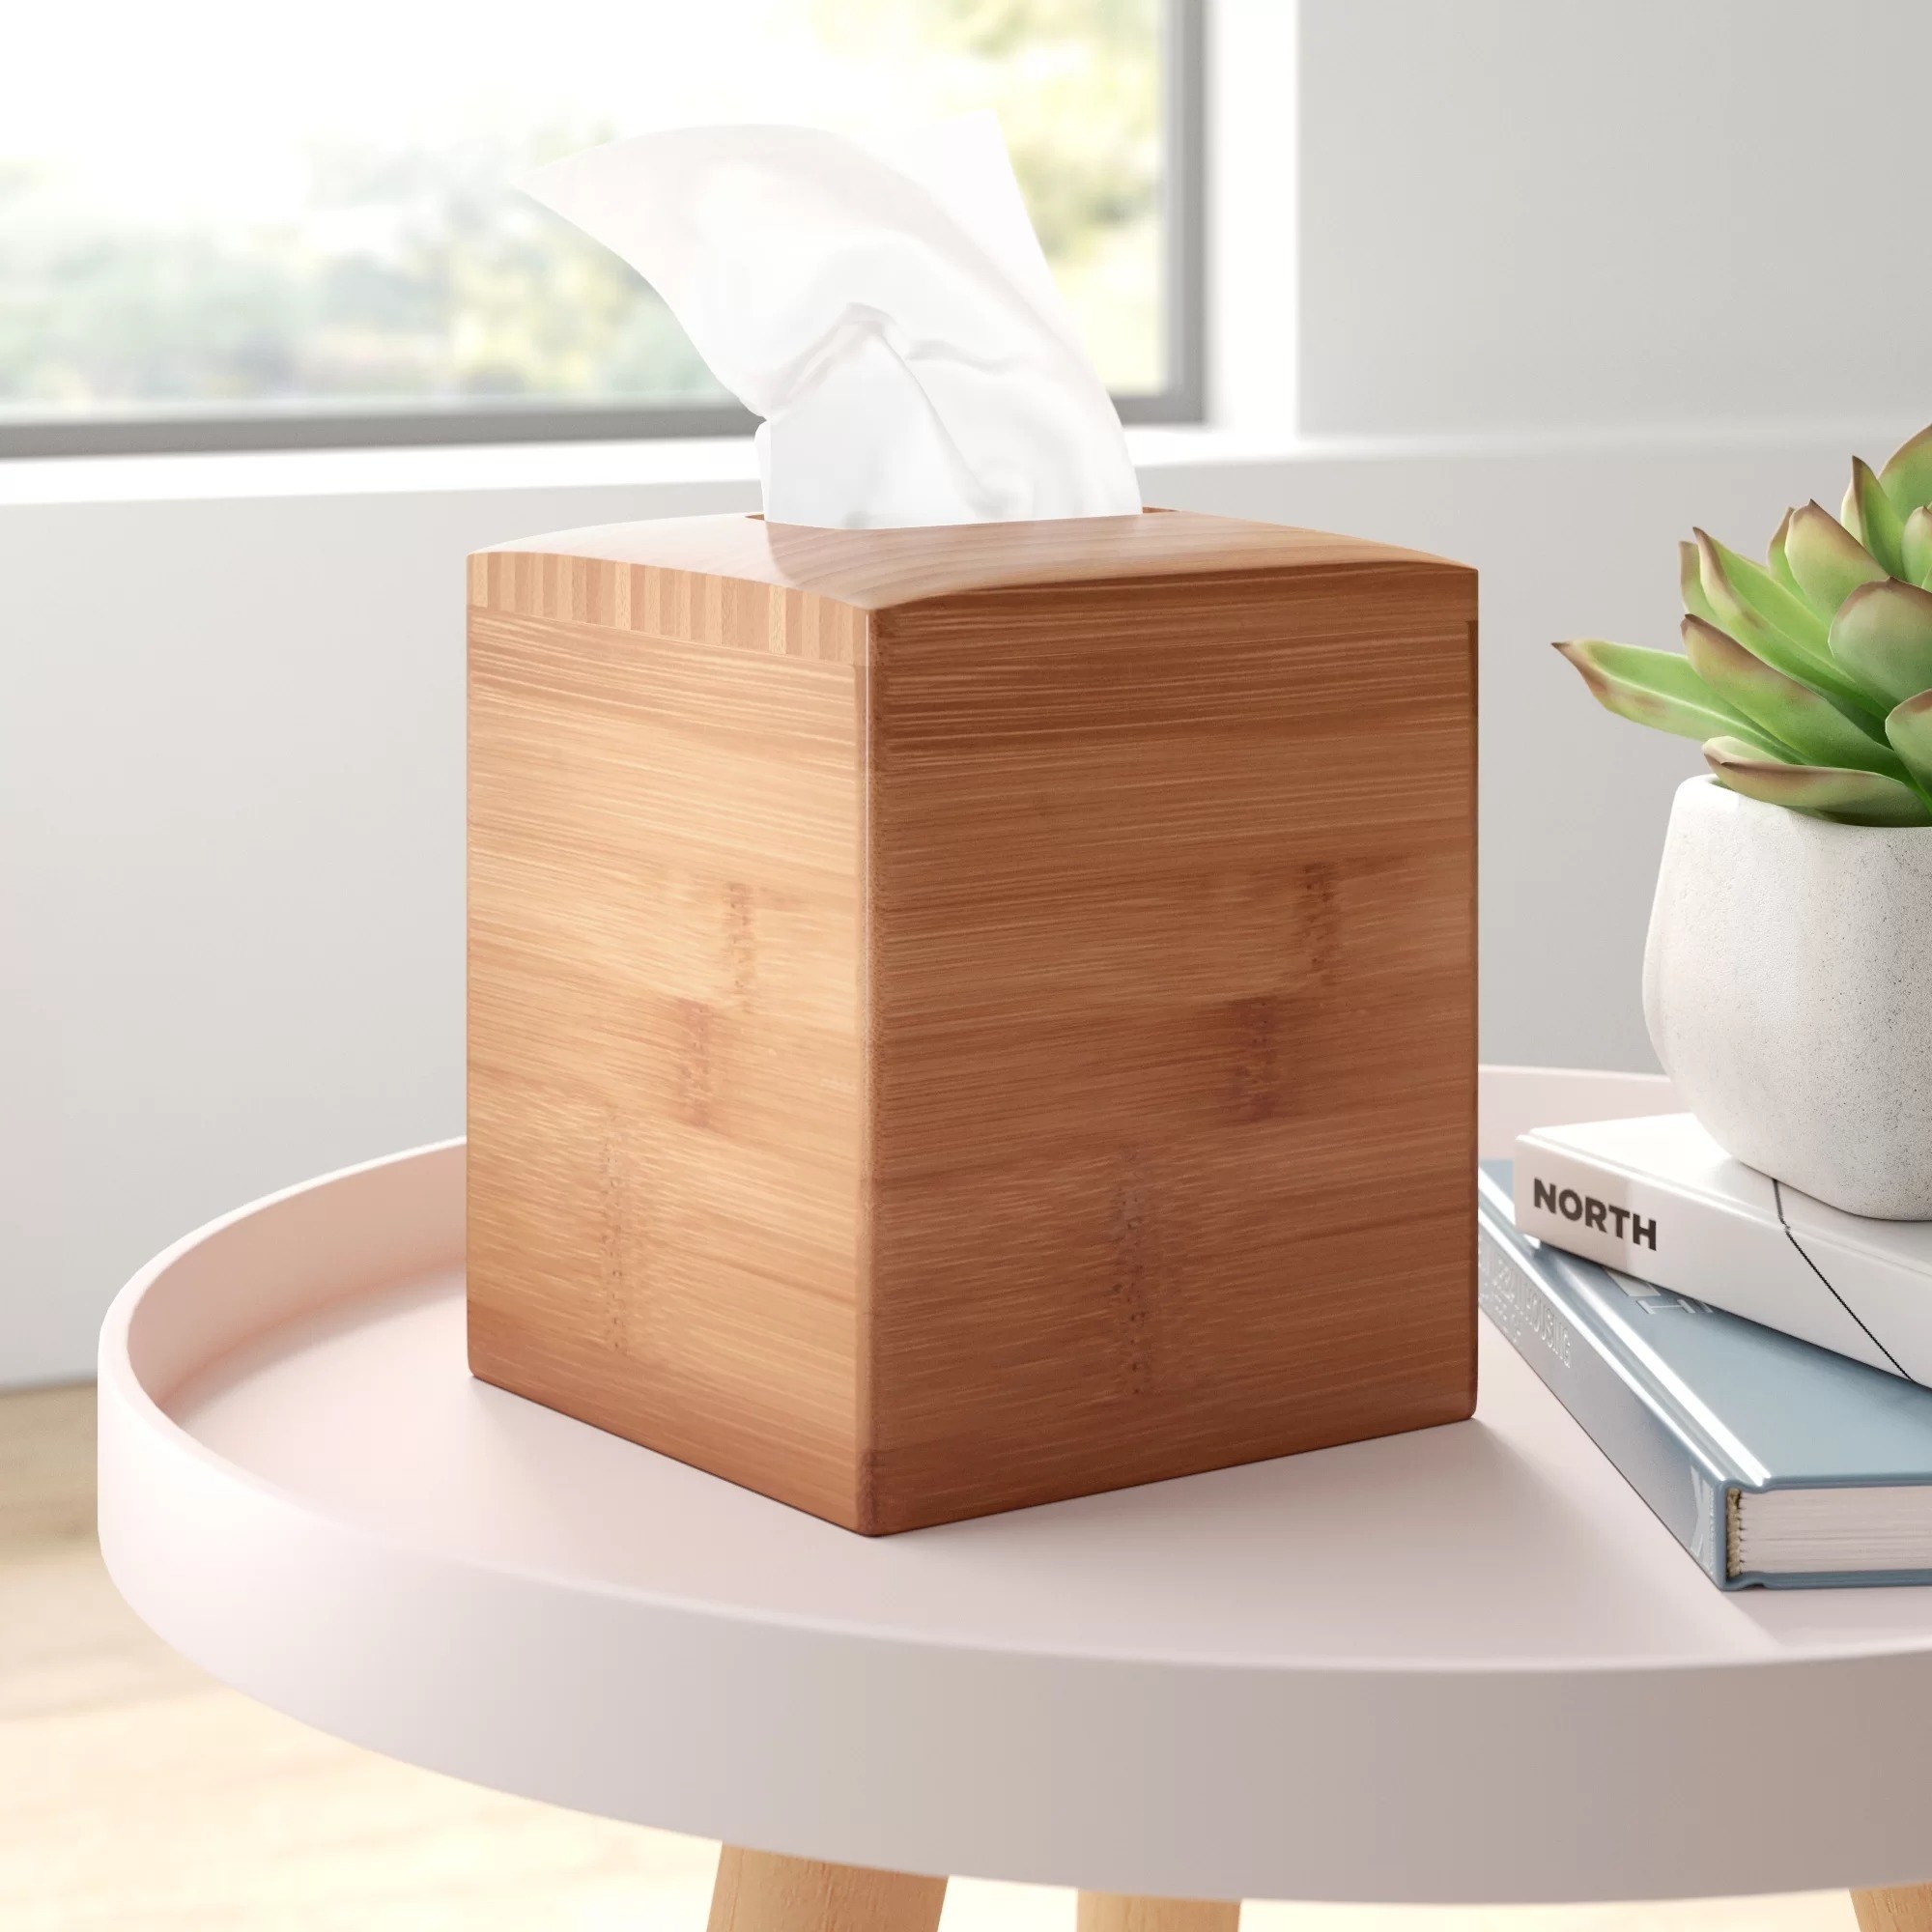 The wooden tissue box holder on a table